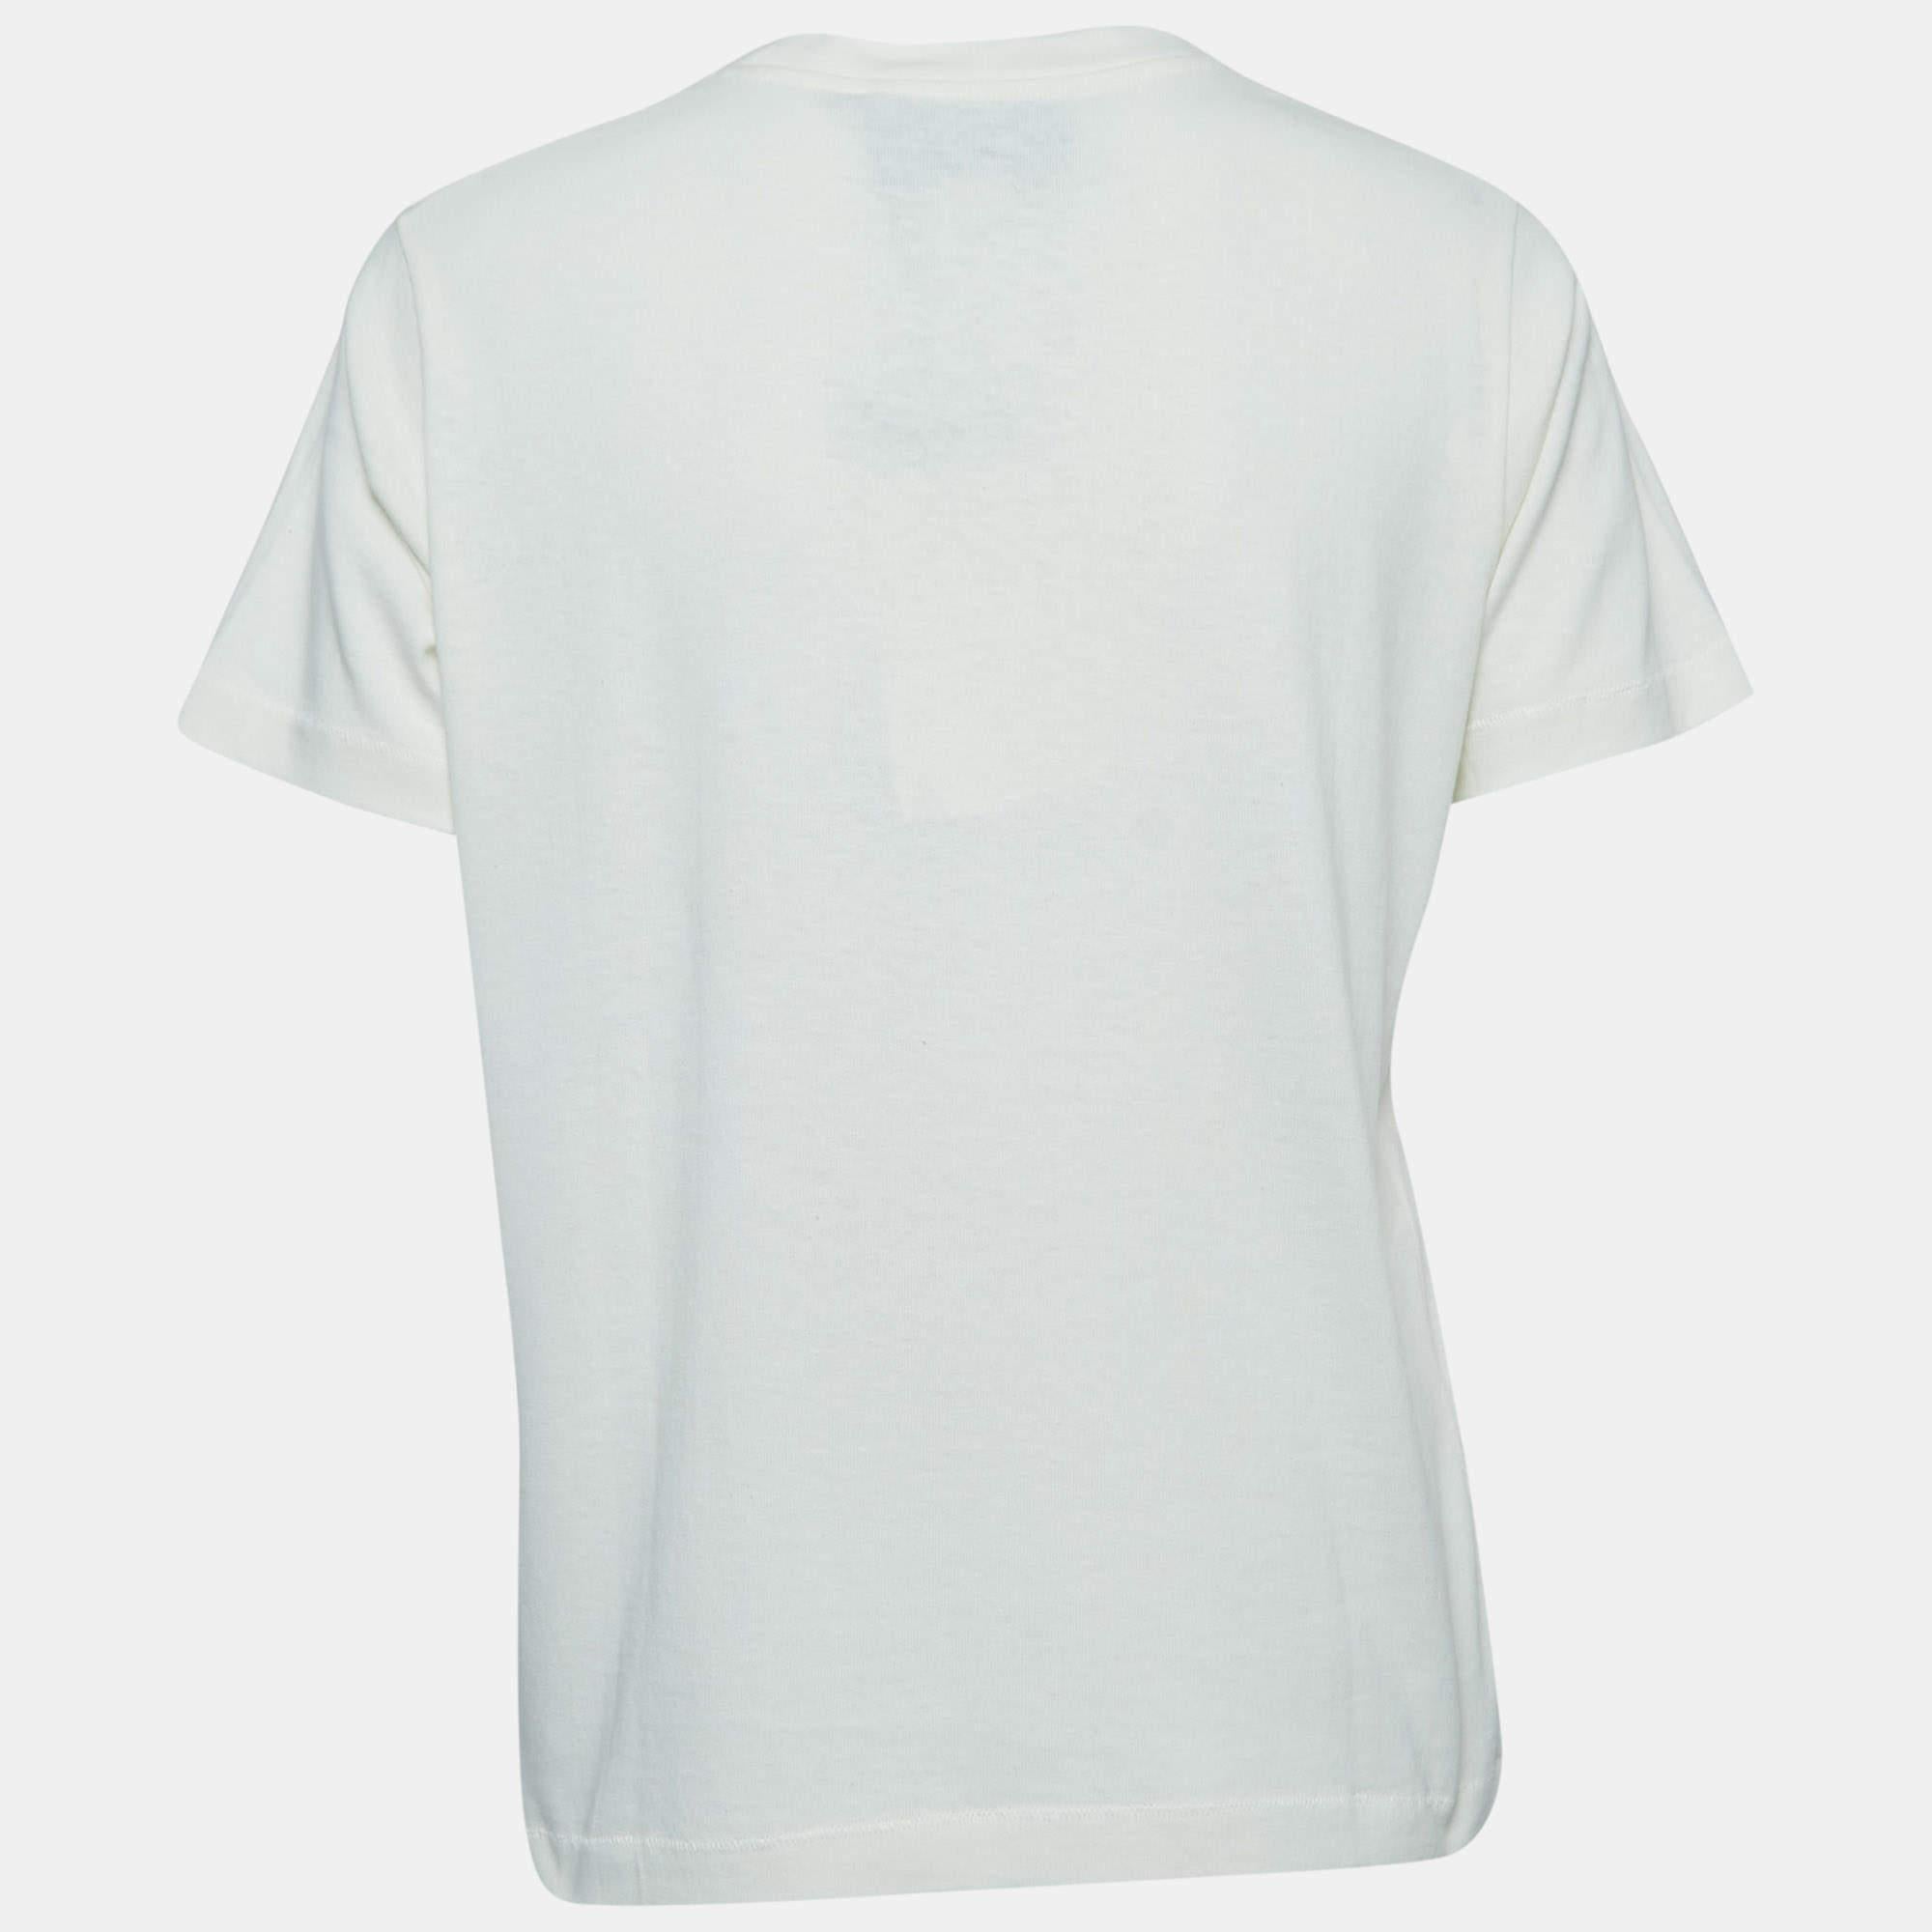 Elevate your everyday style with this meticulously crafted T-shirt by Gucci. Impeccable tailoring ensures a perfect fit, while the breathable fabric offers unparalleled ease. The creation fuses fashion and comfort seamlessly.

